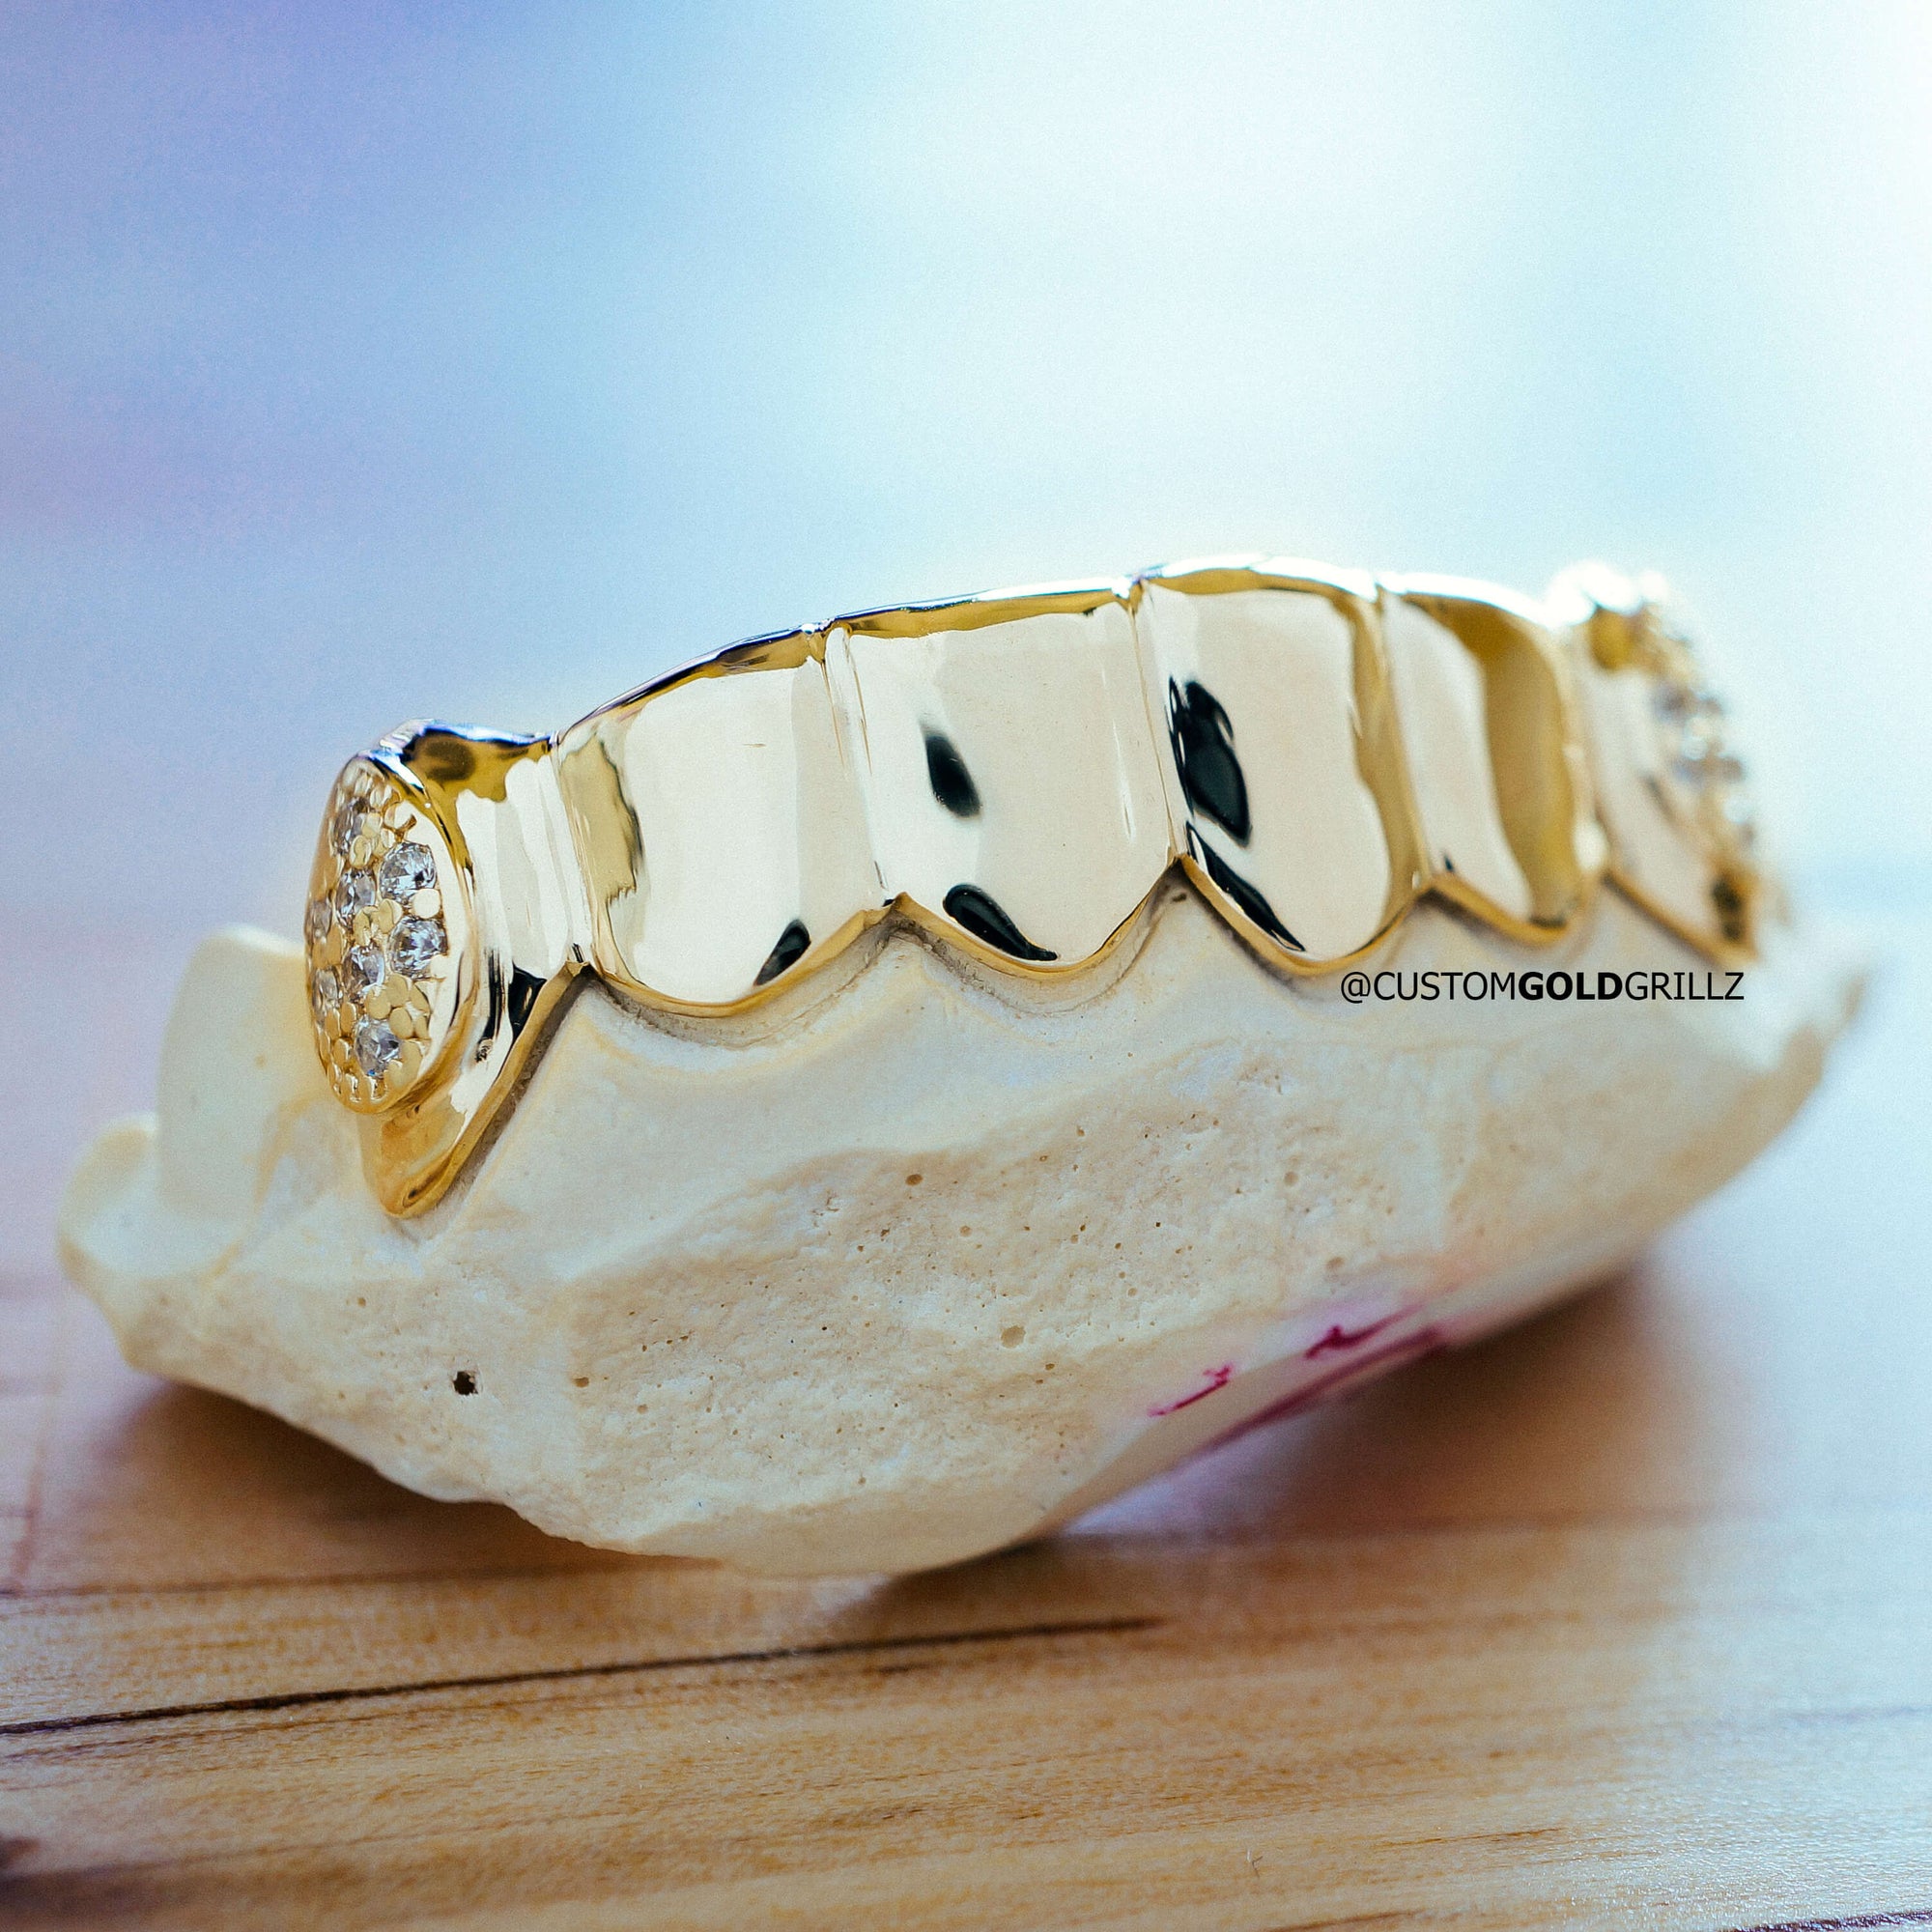 How Are Grillz Made?